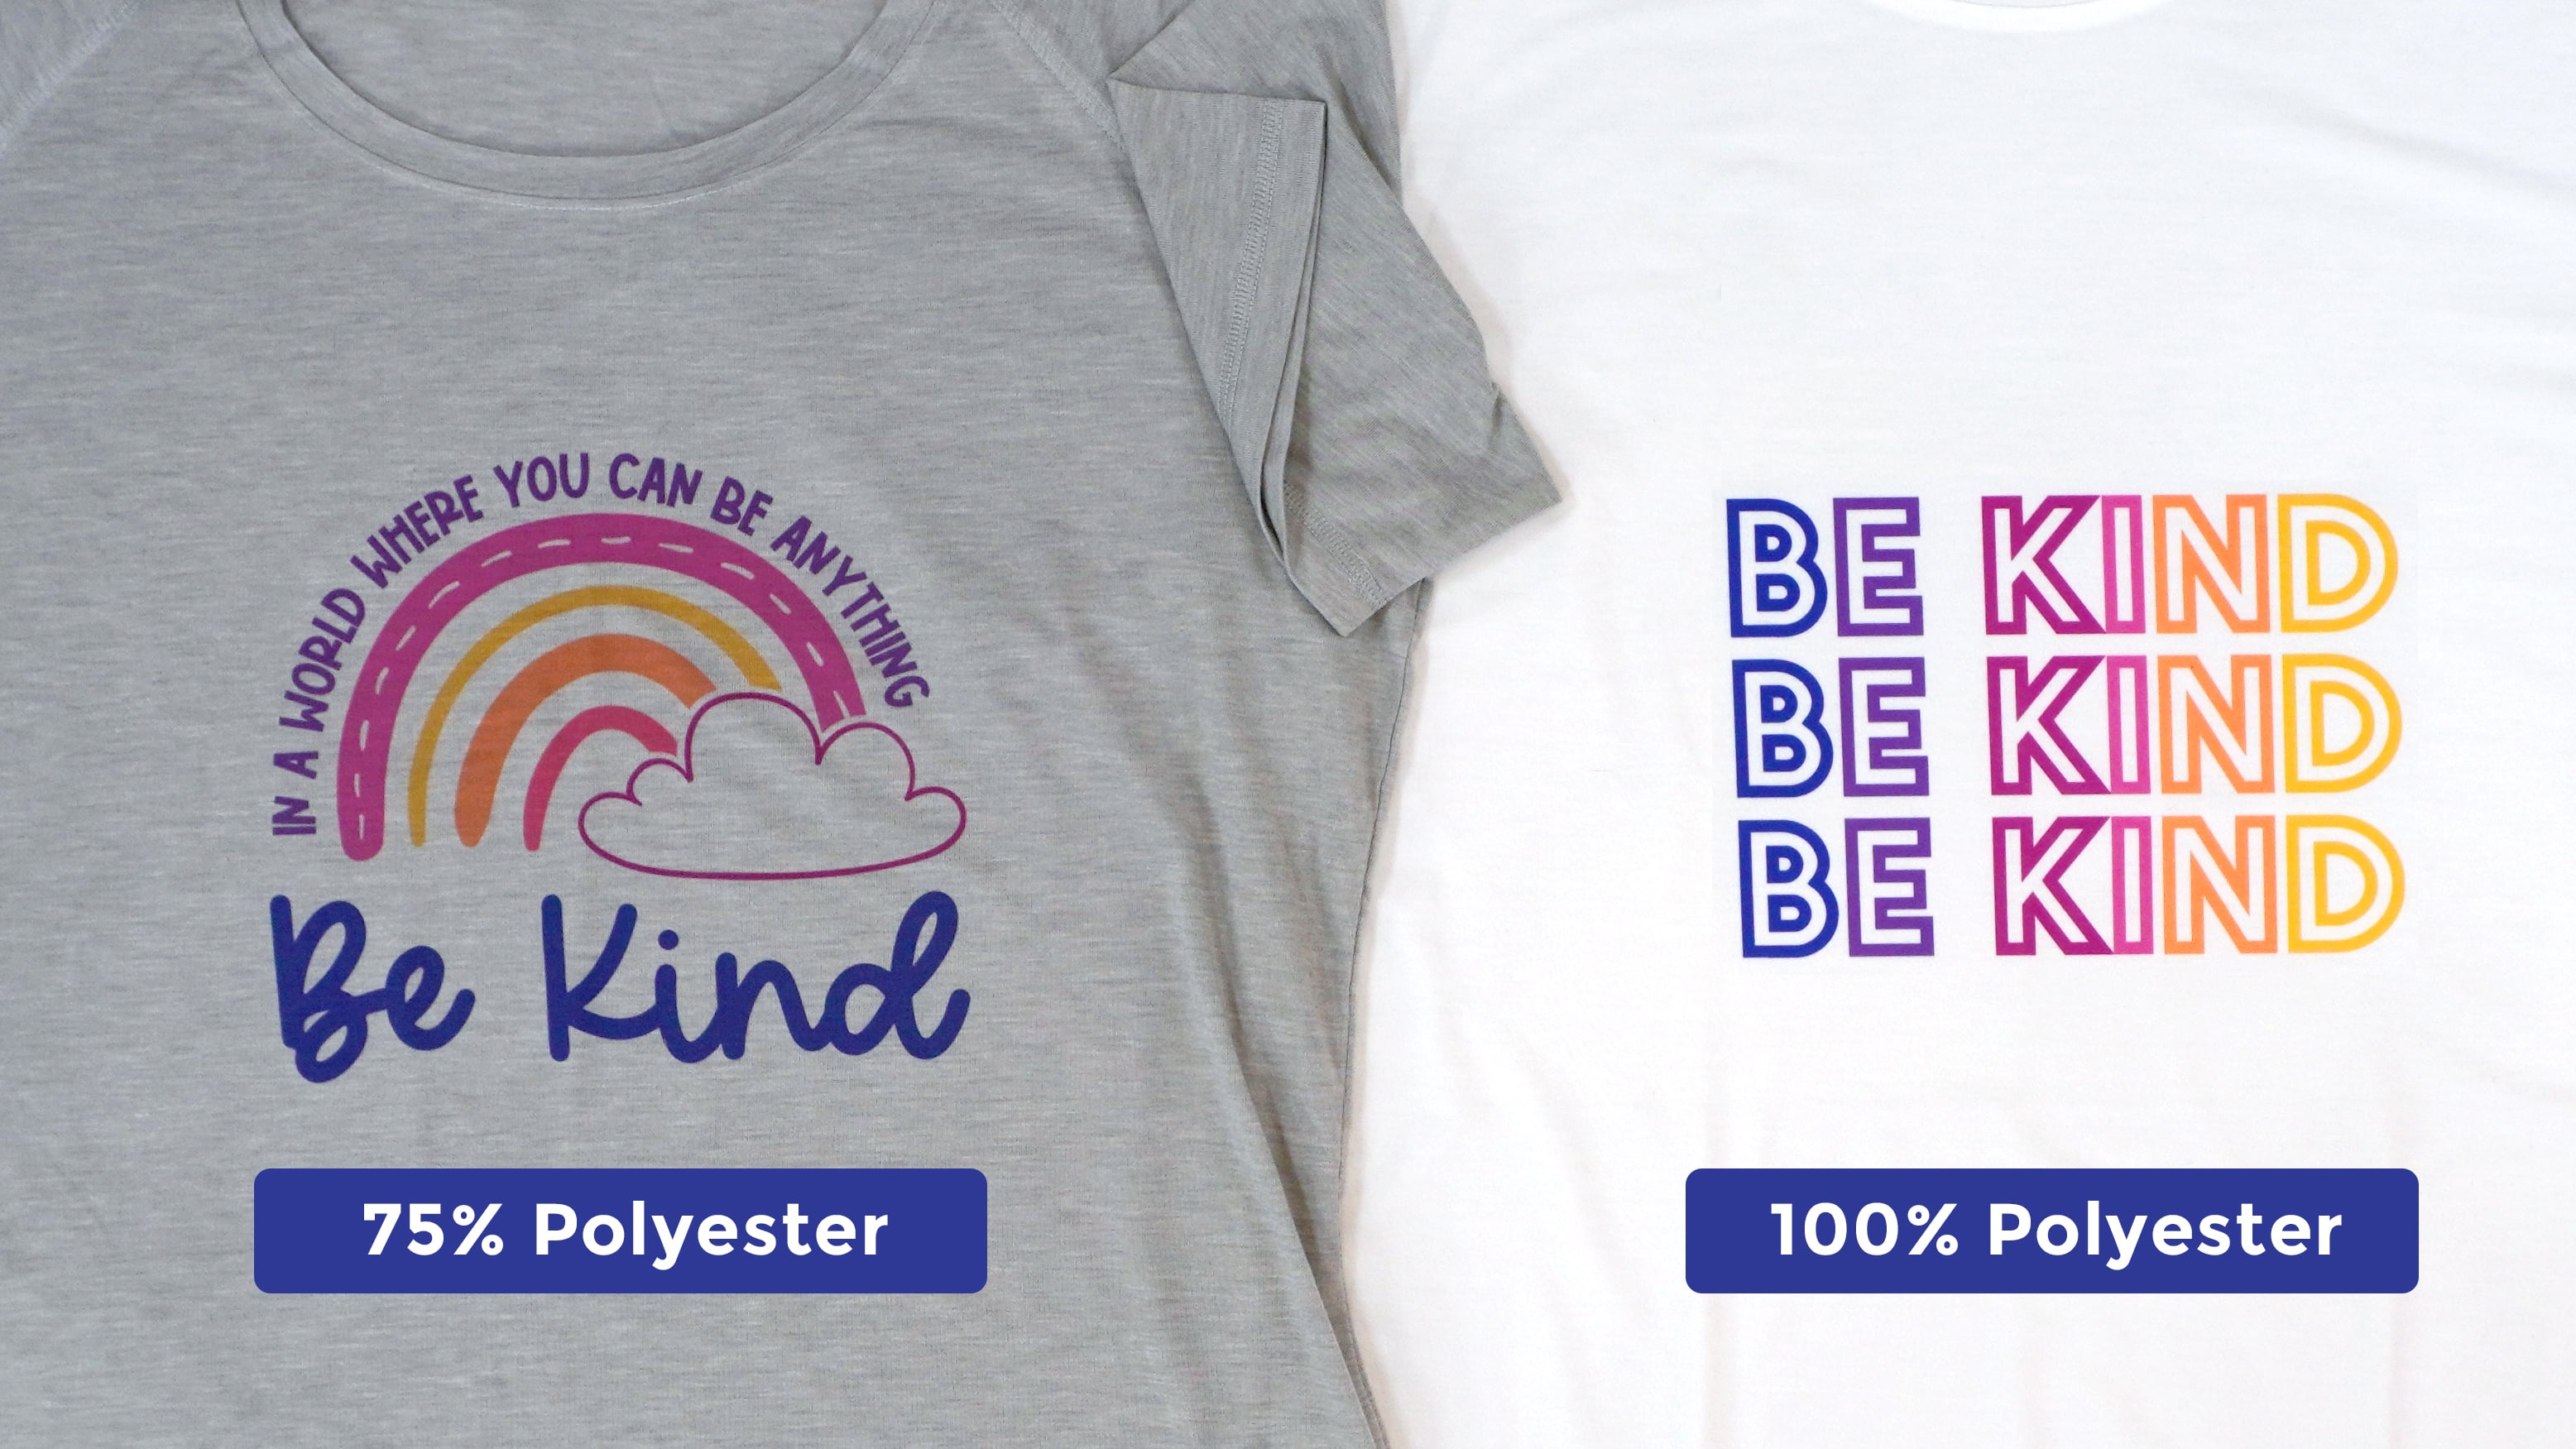 Two colorful printed t-shirts, one grey and one white, side by side with labels "75% polyester" and "100% polyester"